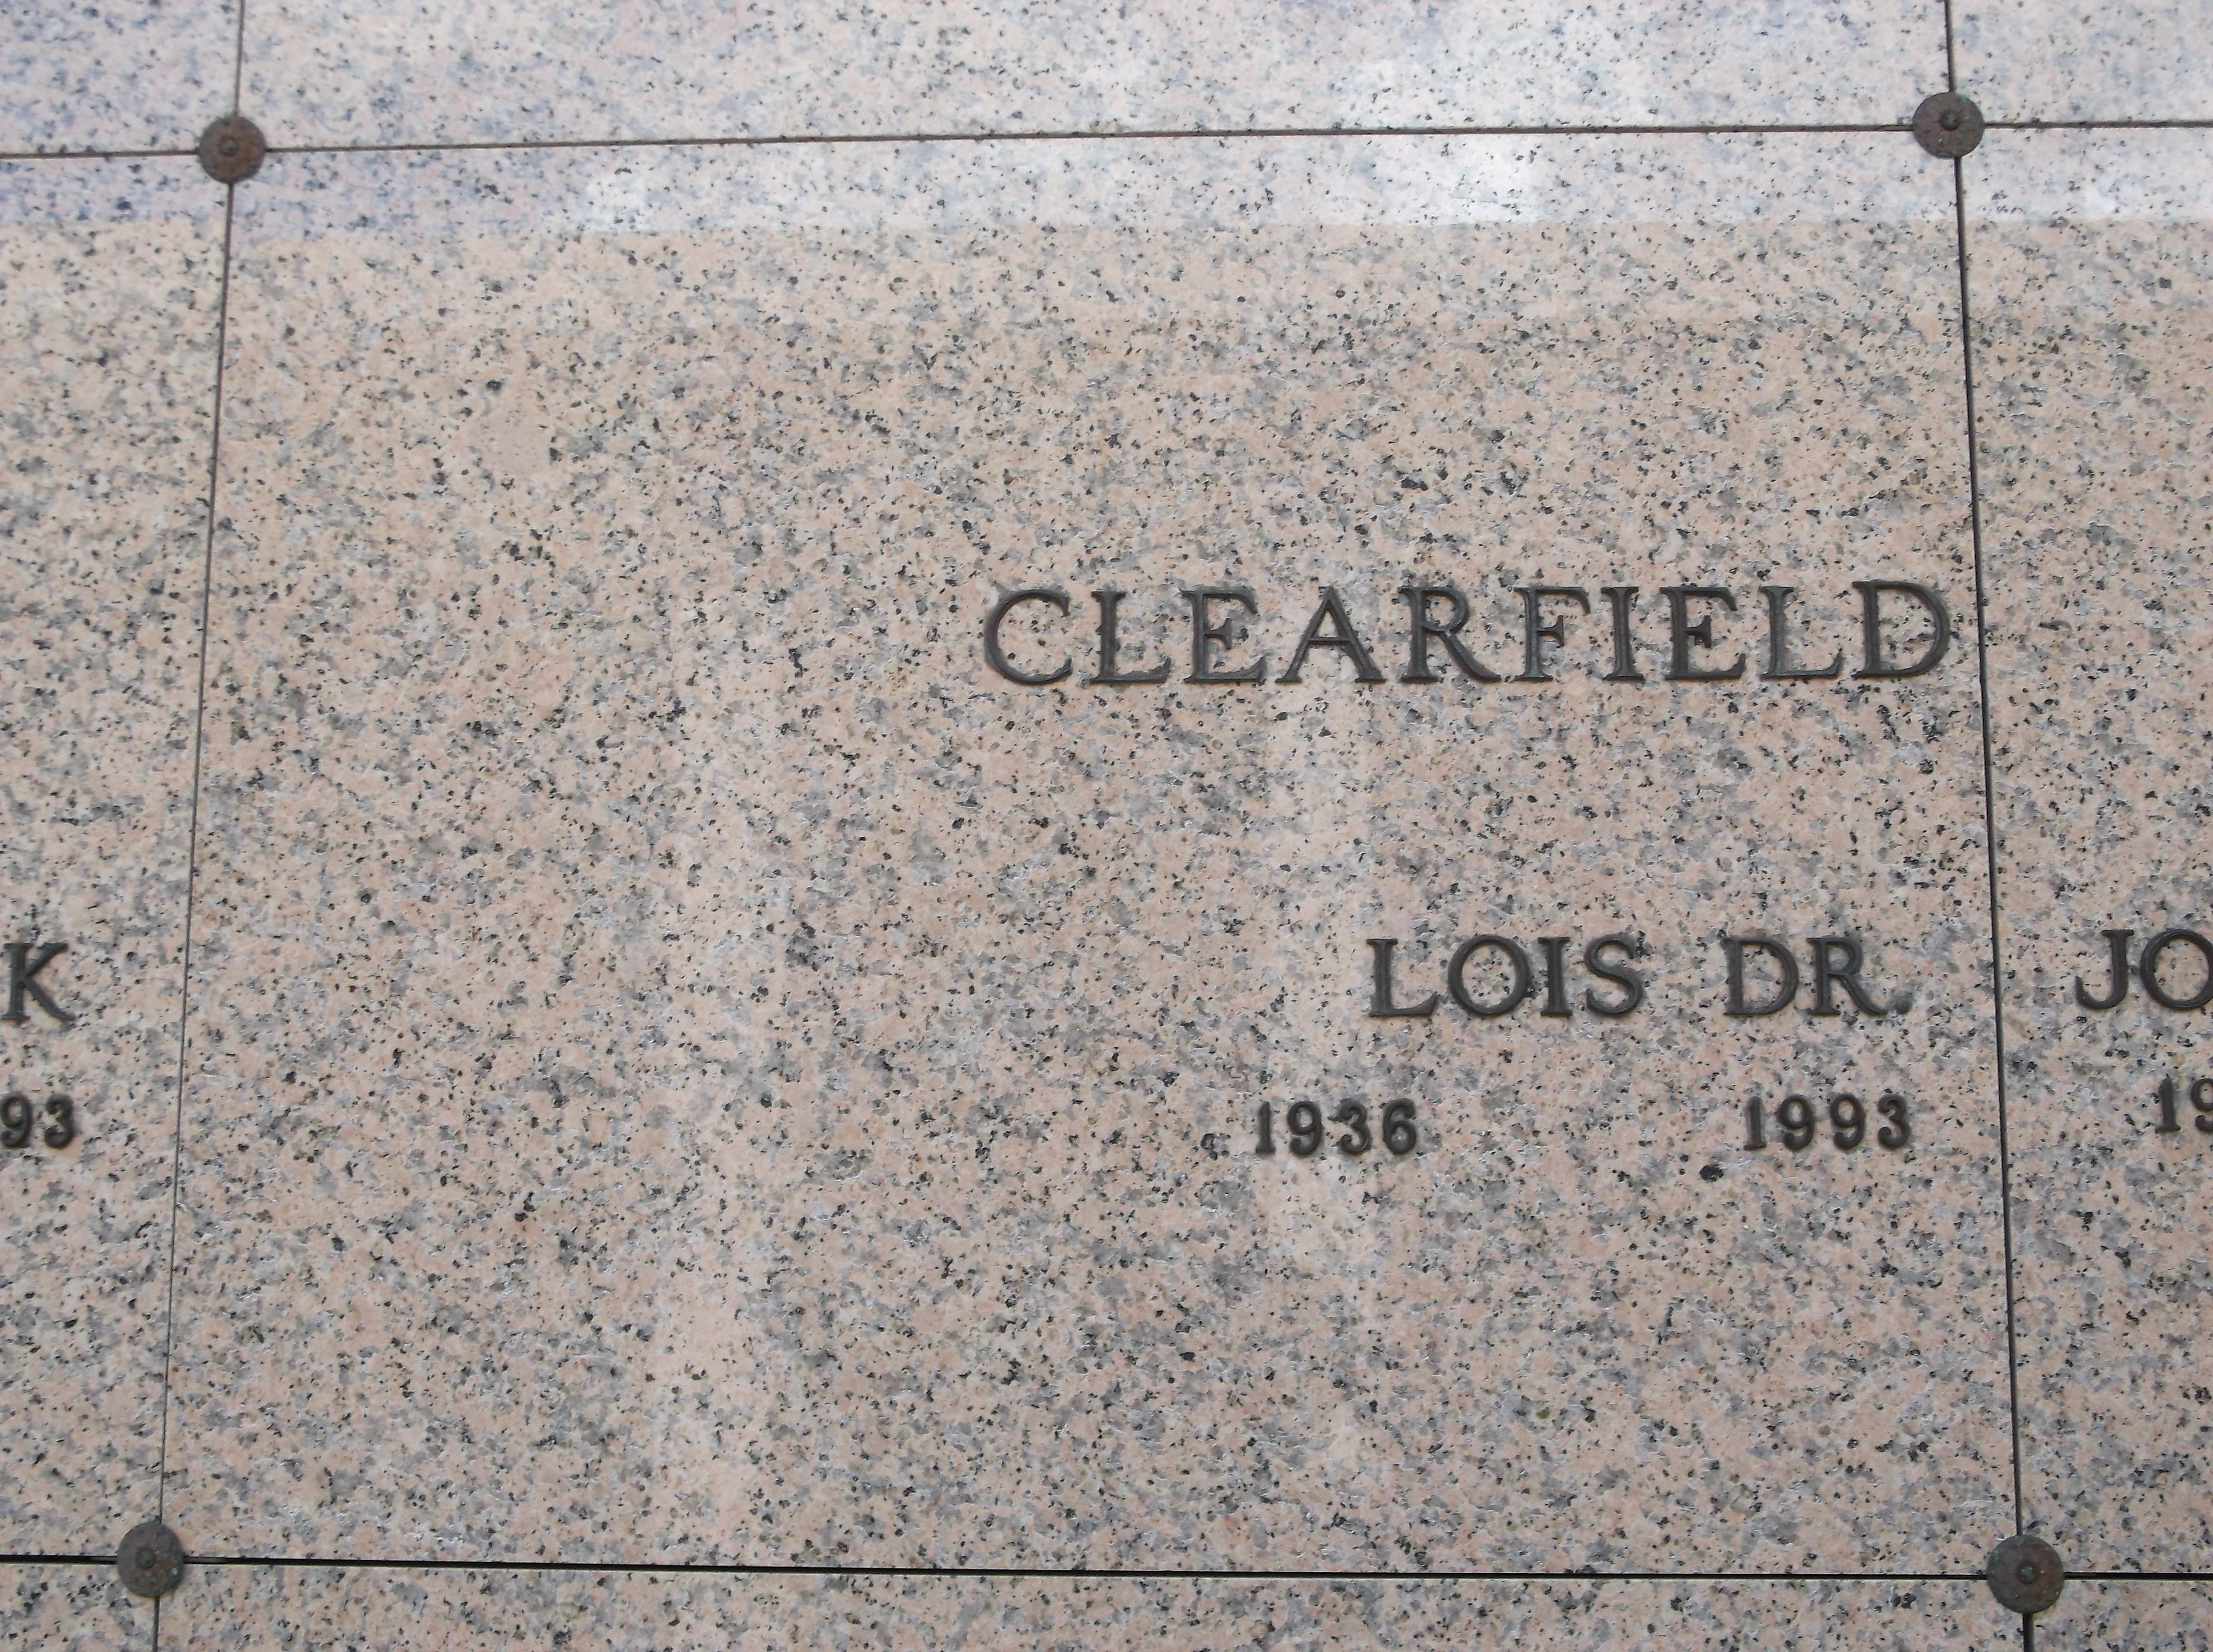 Dr Lois Clearfield